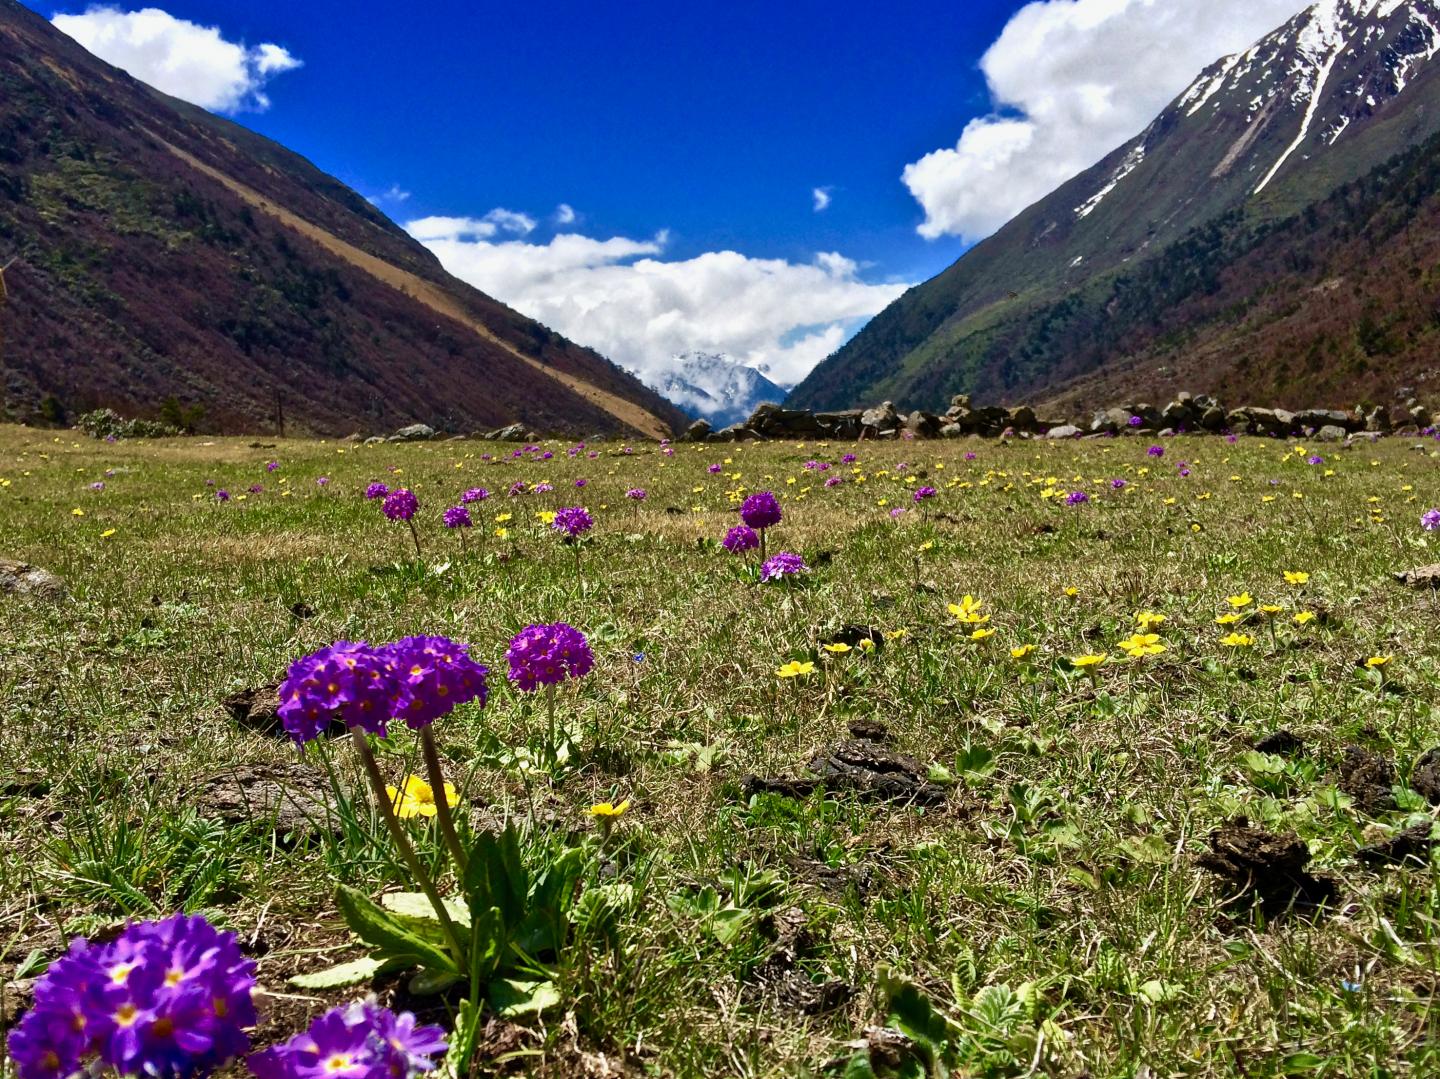 Pollination in the Himalayas